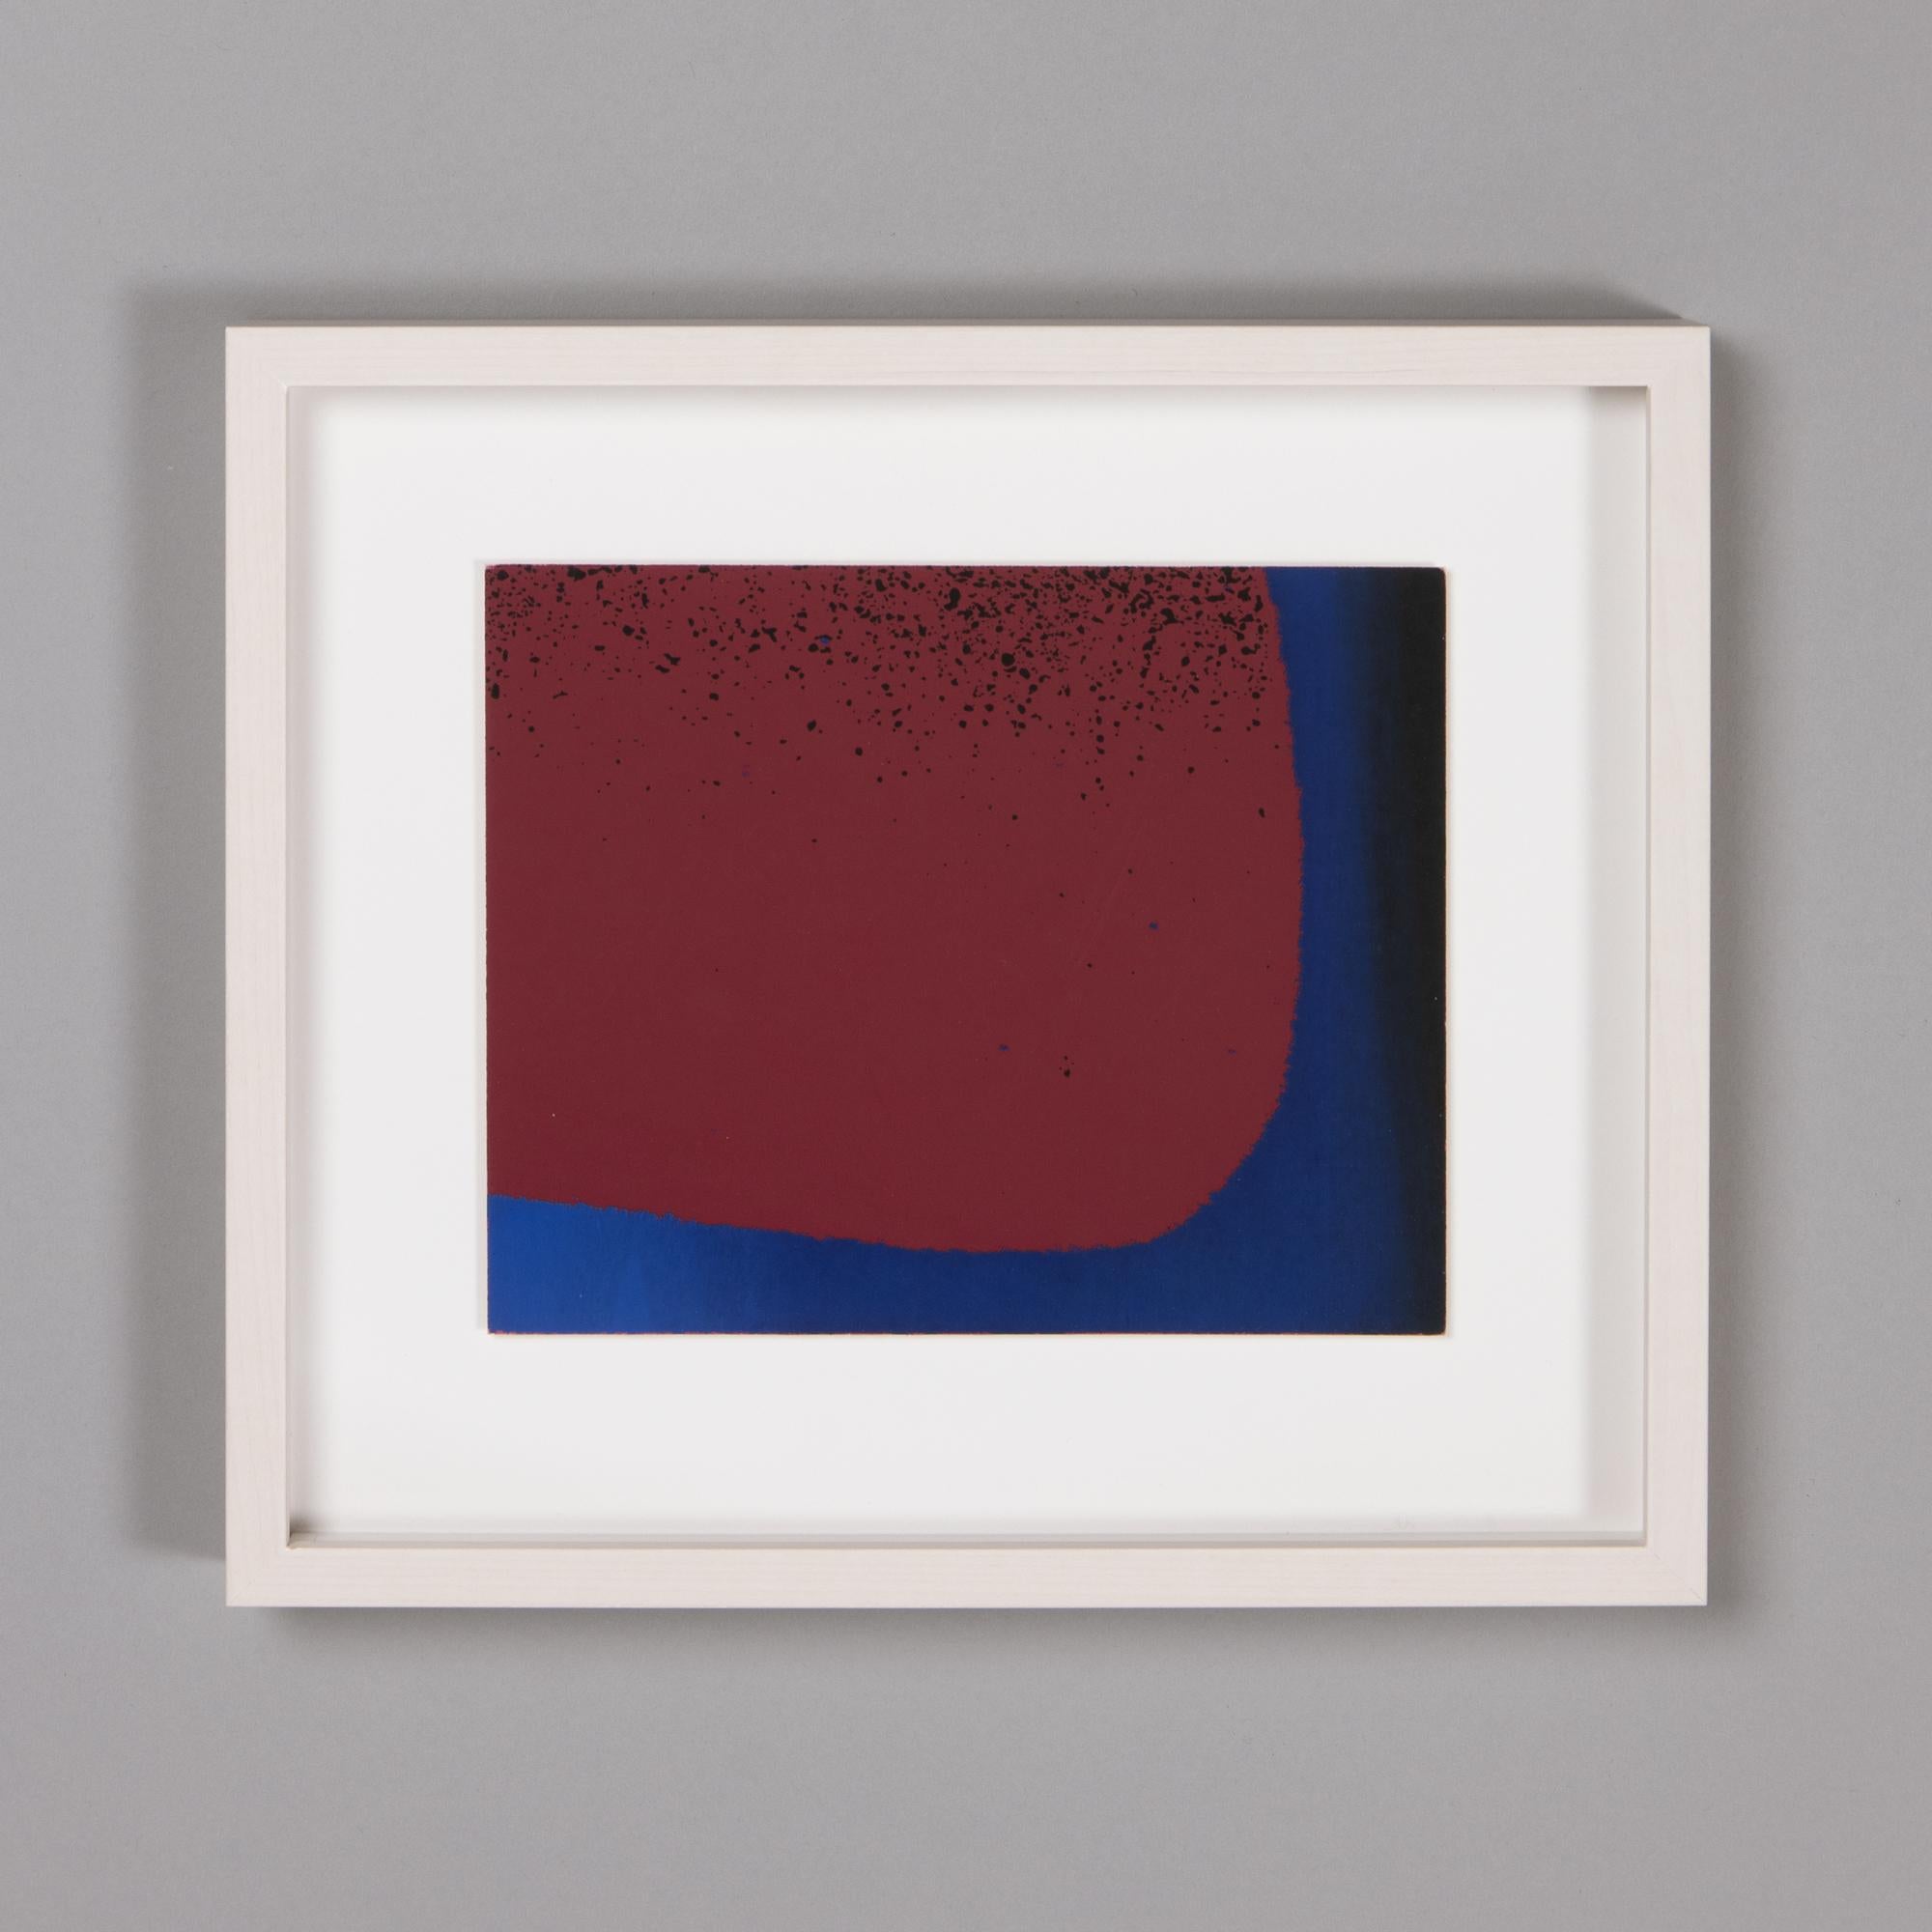 Rupprecht Geiger, Bluish Red and Blue-Black - Abstract Art, Signed Print For Sale 1